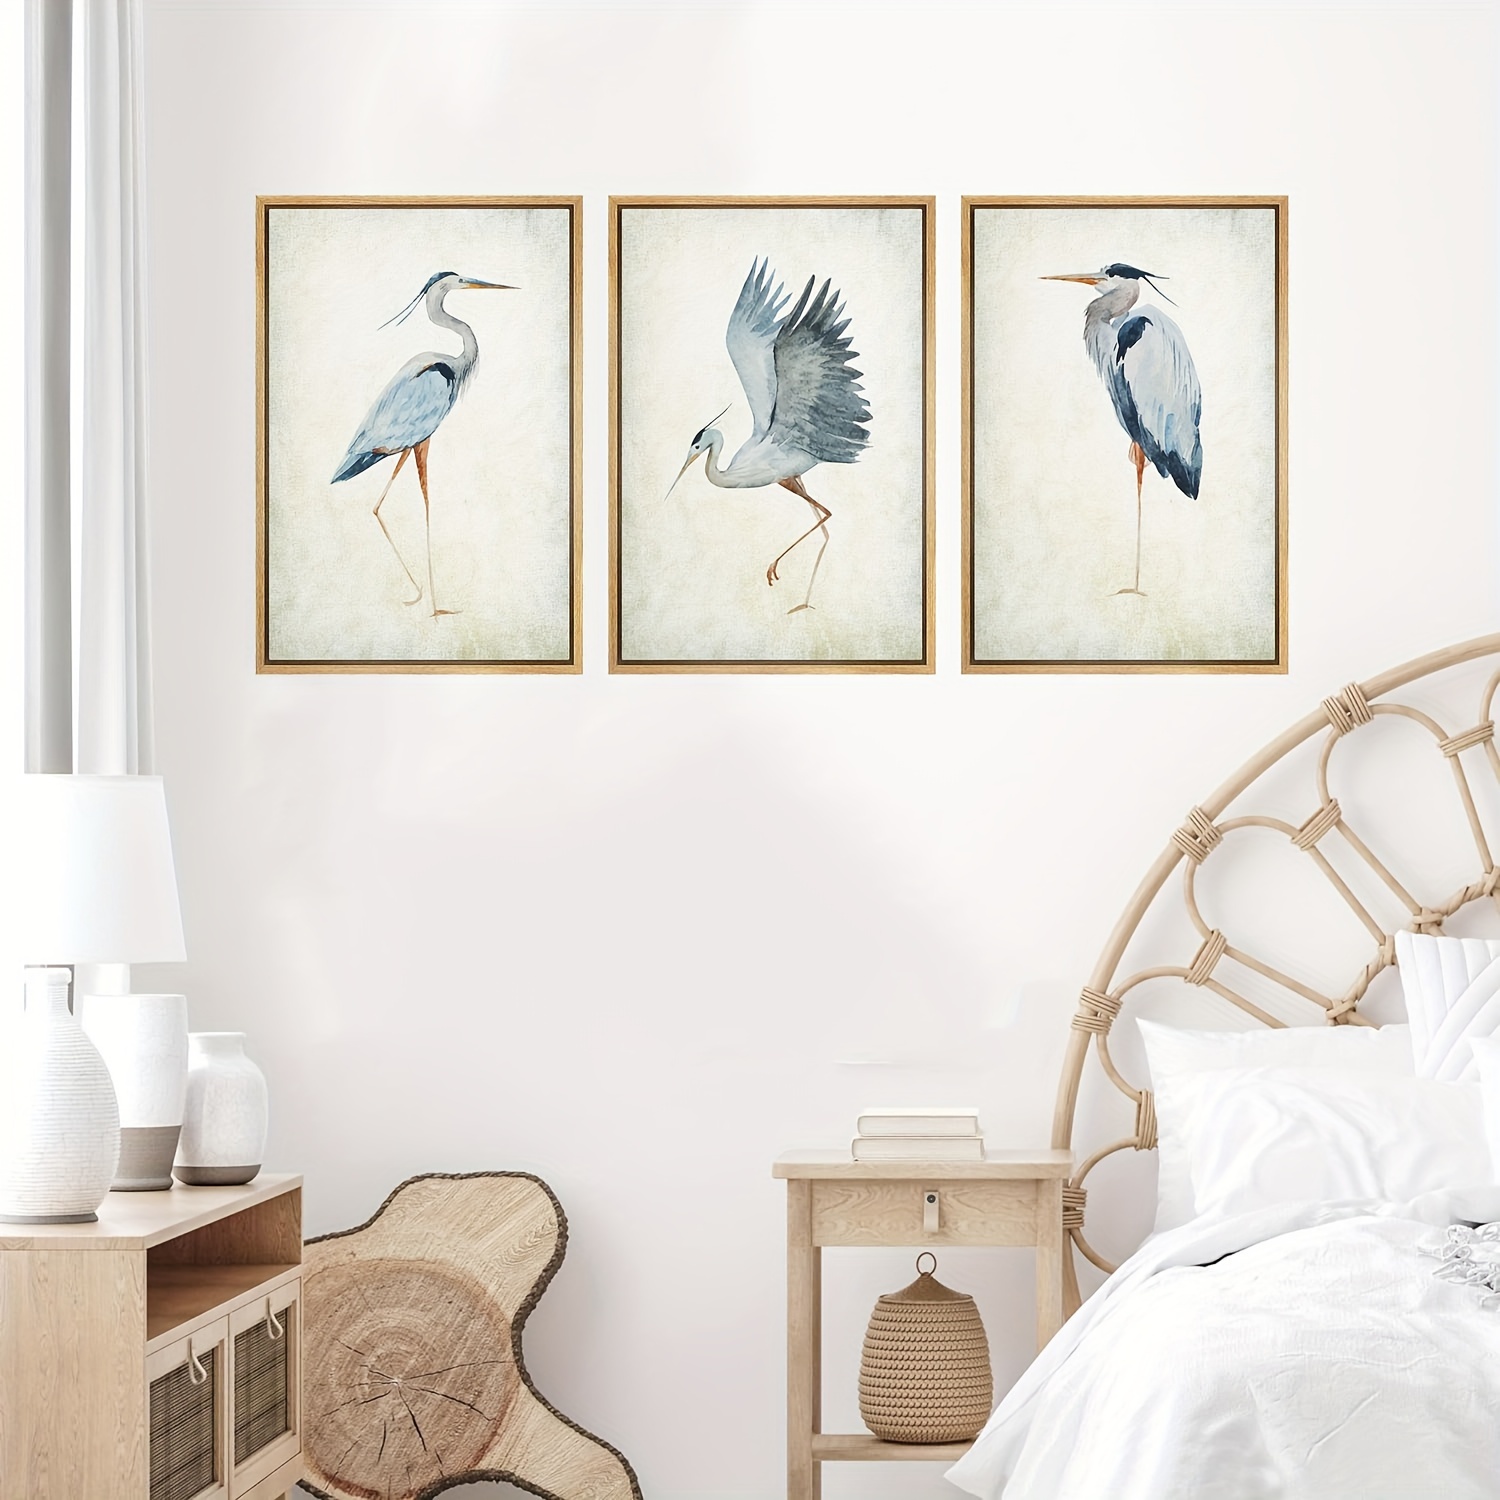 3pcs canvas wall art heron bird wild animal gallery wrap modern home art 8 10 inch 12 16 inch 16 24 inc bedroom and office in three different sizes as a home gift frameless